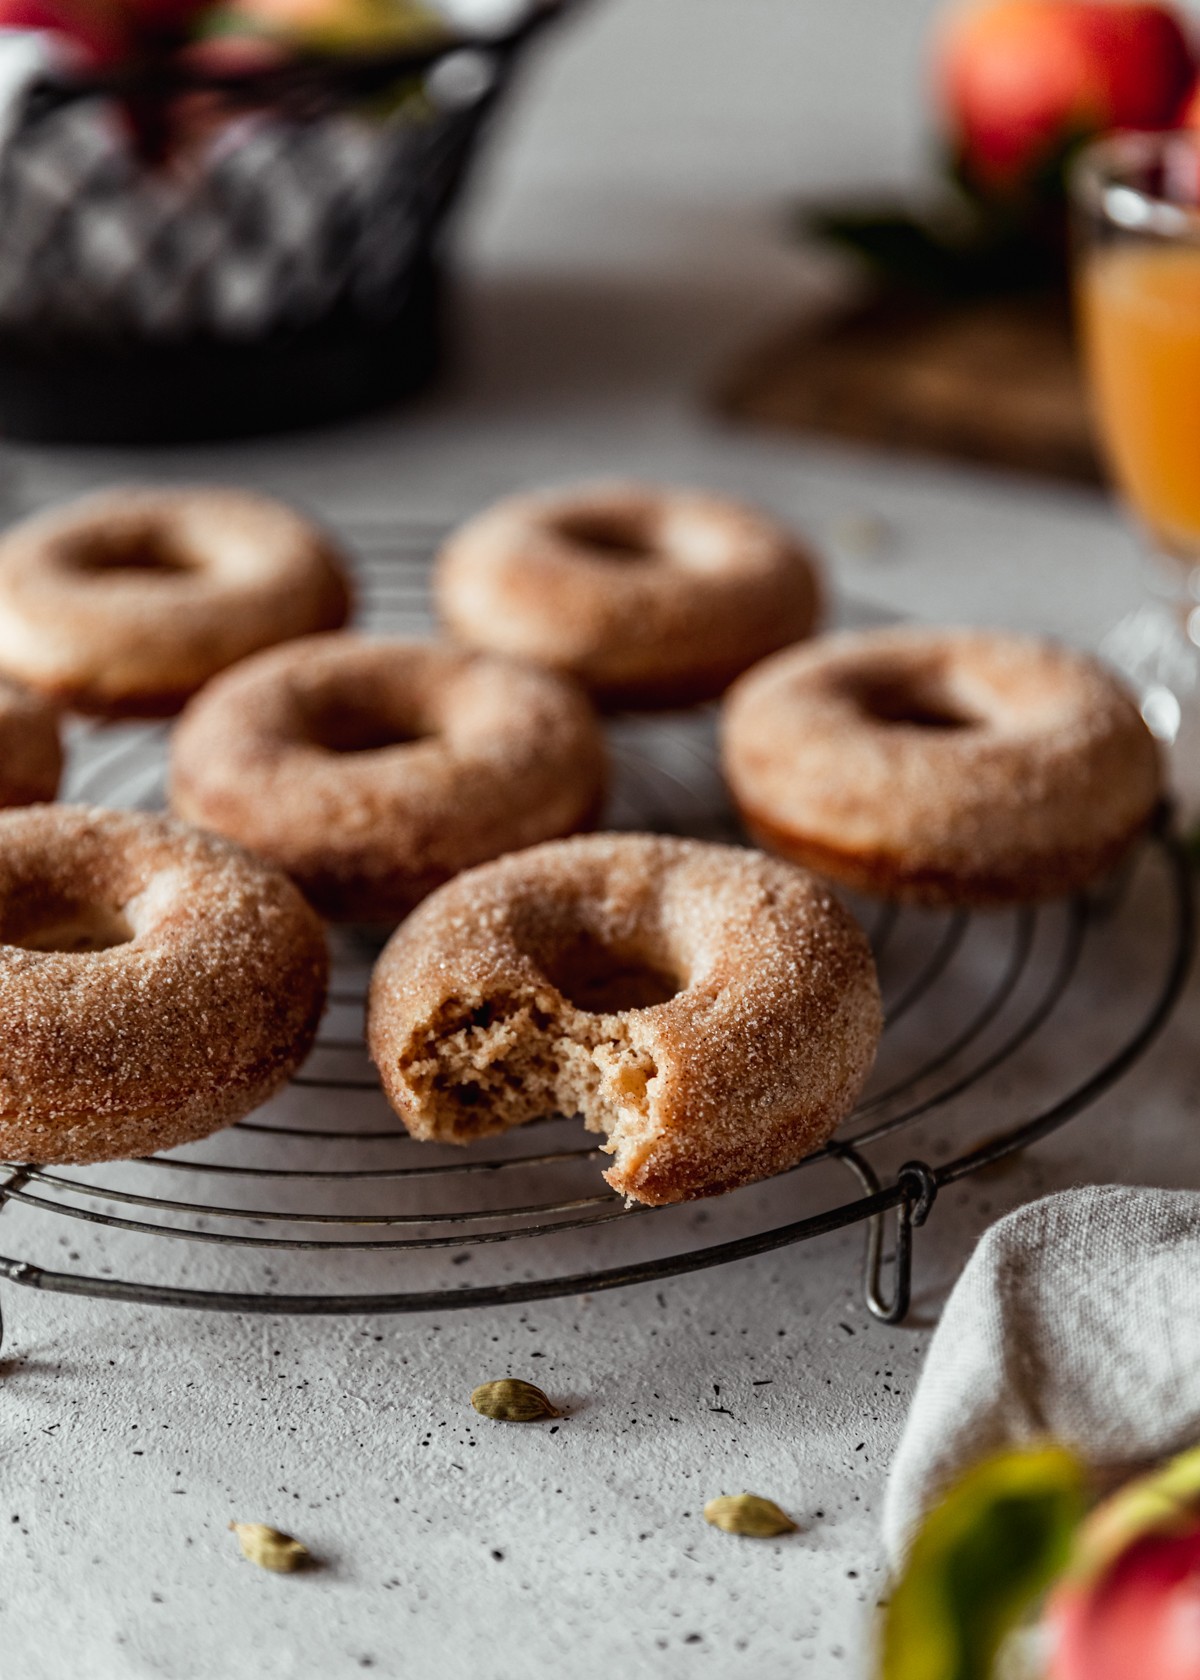 A closeup side image of an apple cider donut with a bite taken out of it on a round cooling rack with more donuts behind it. The cooling rack is on a white speckled table with a black bowl, wood board of apples, and glass of apple cider in the background.